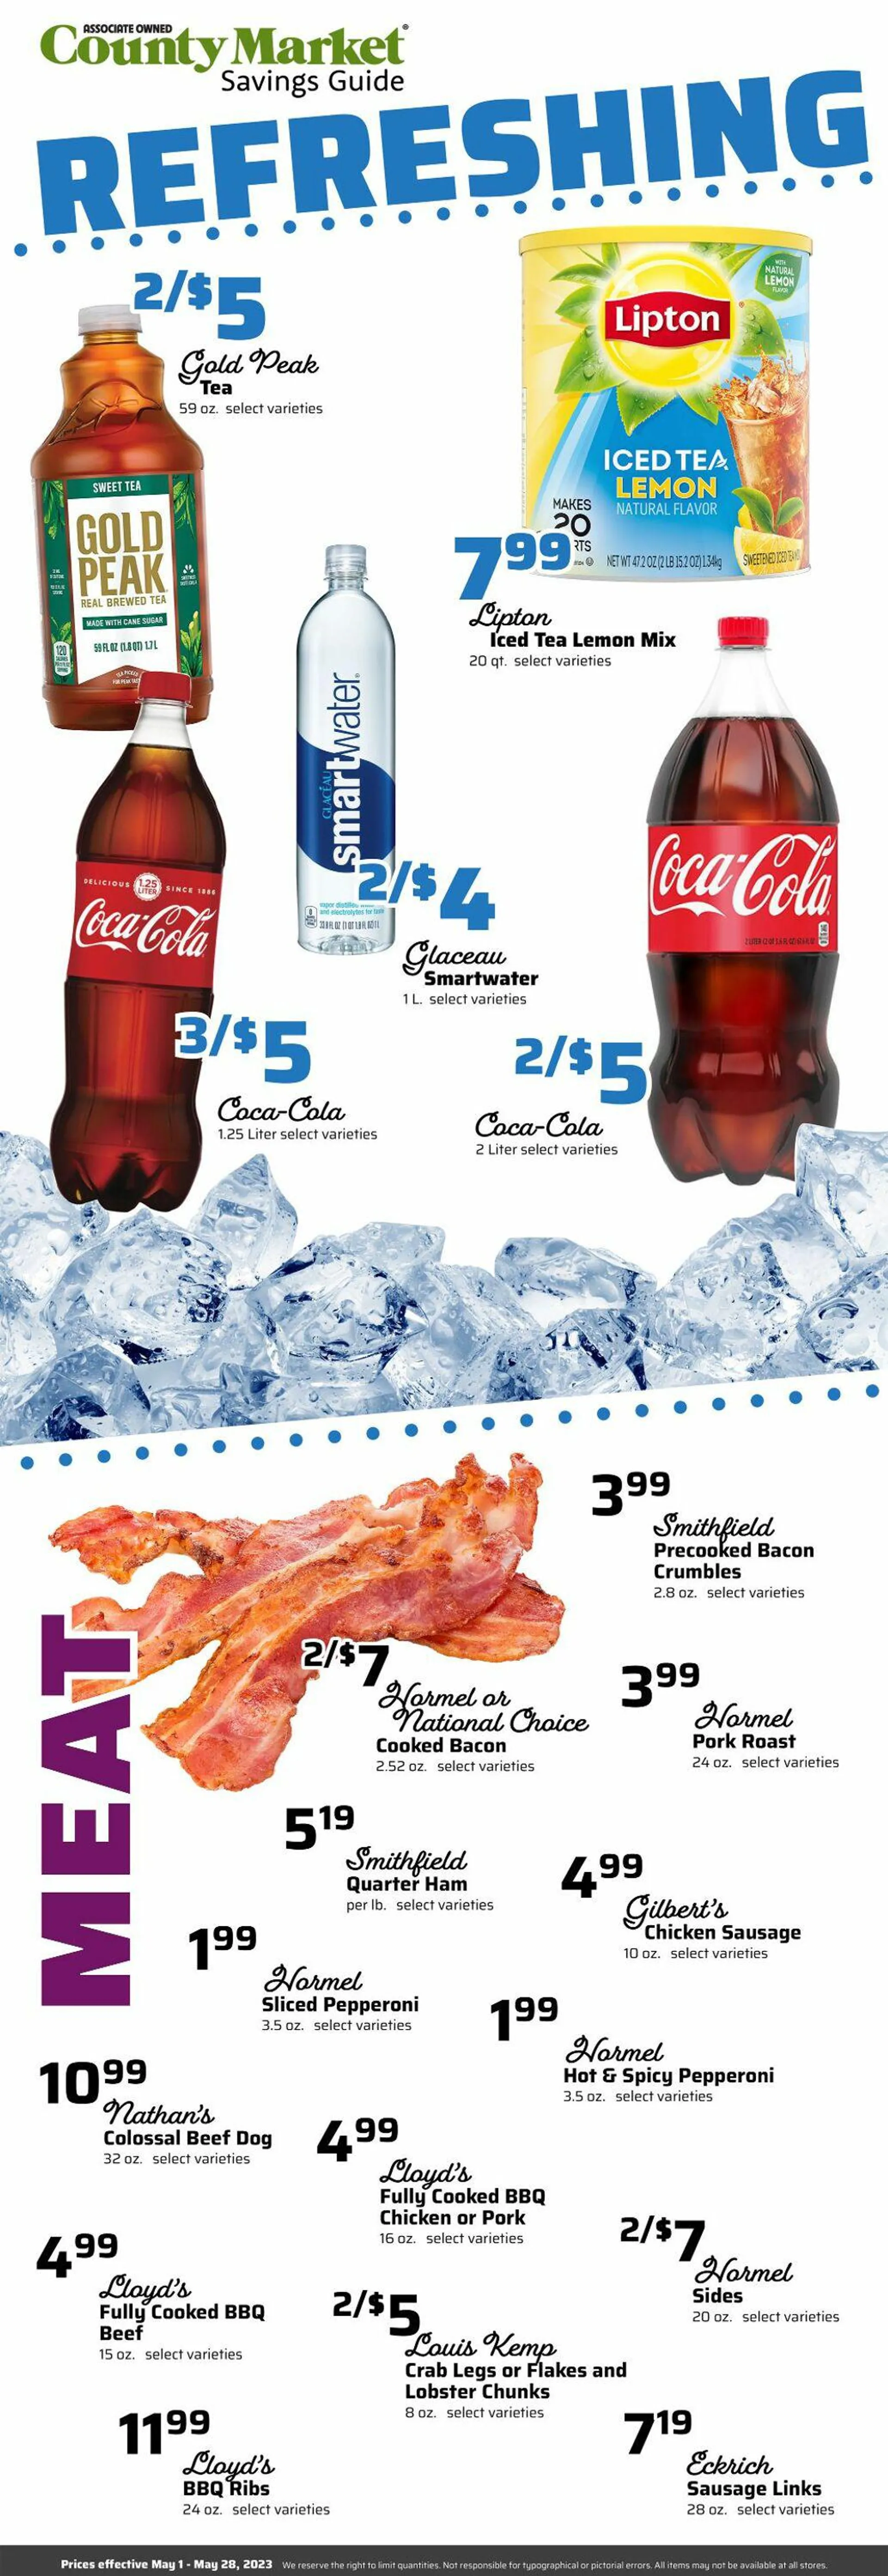 County Market Current weekly ad - 15